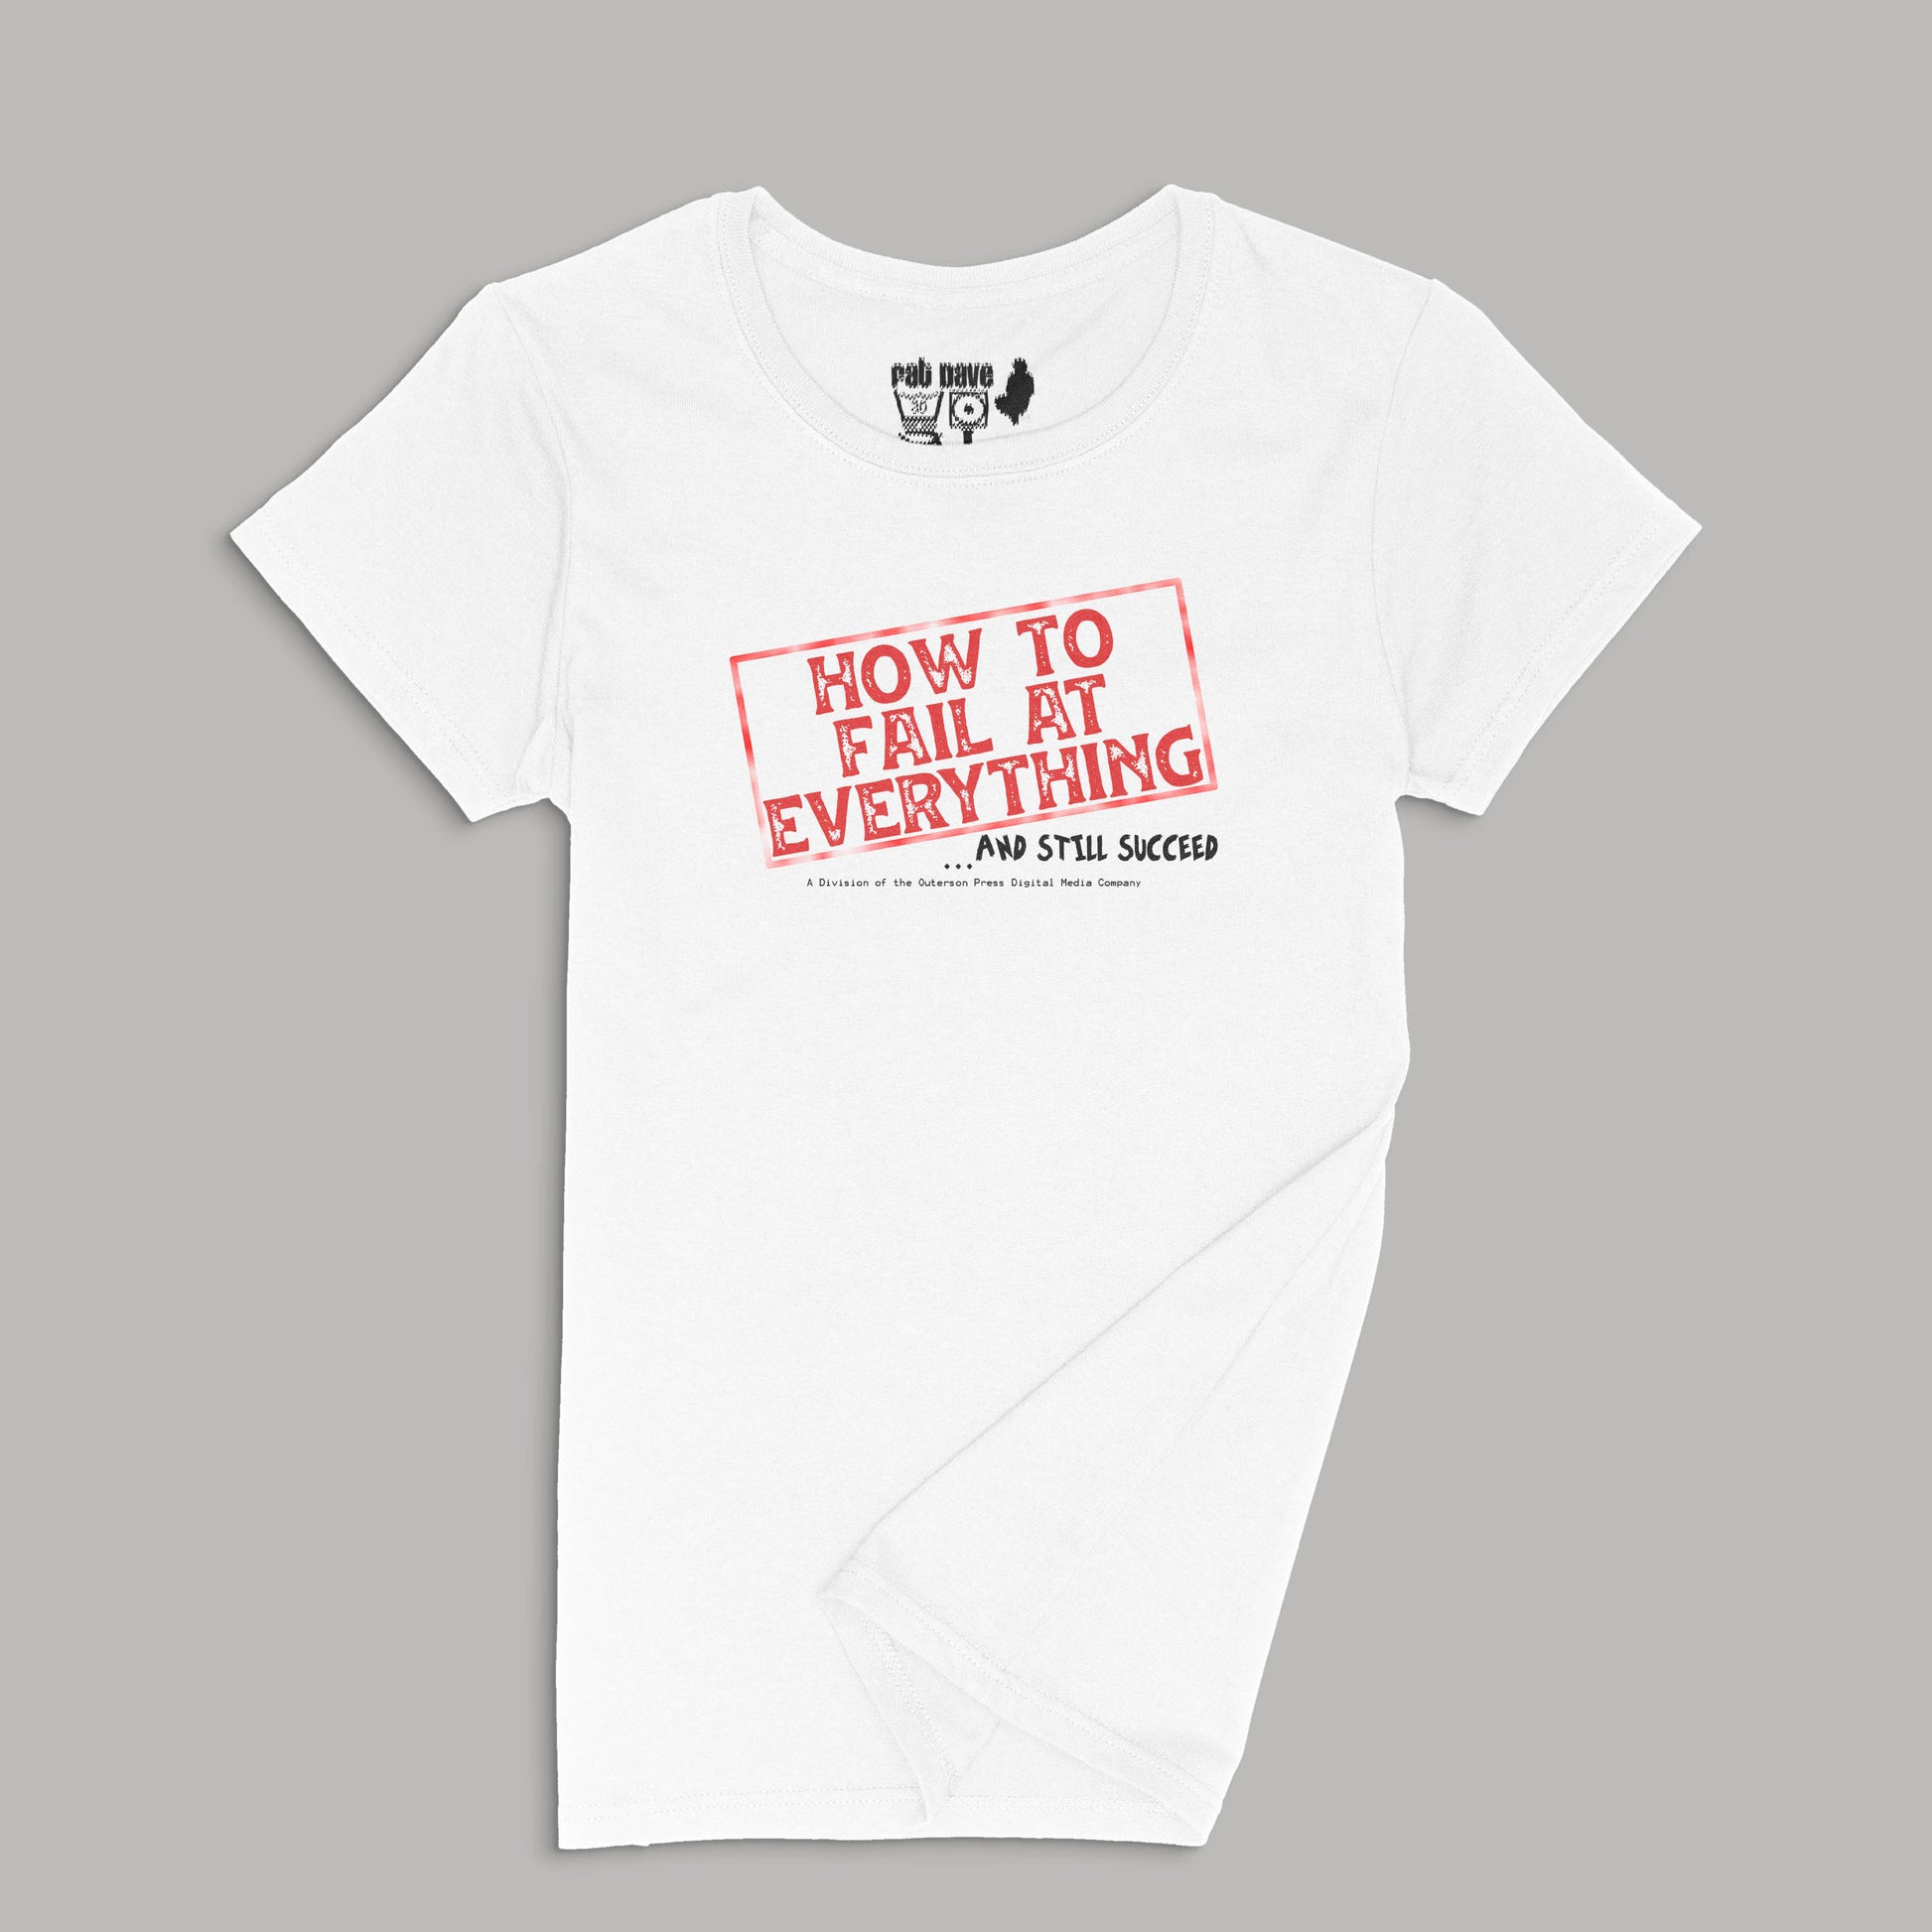 Brantford, Fat Dave, How To Fail At Everything, Ladies Crew Neck Shirt, Logo, Podcast, White